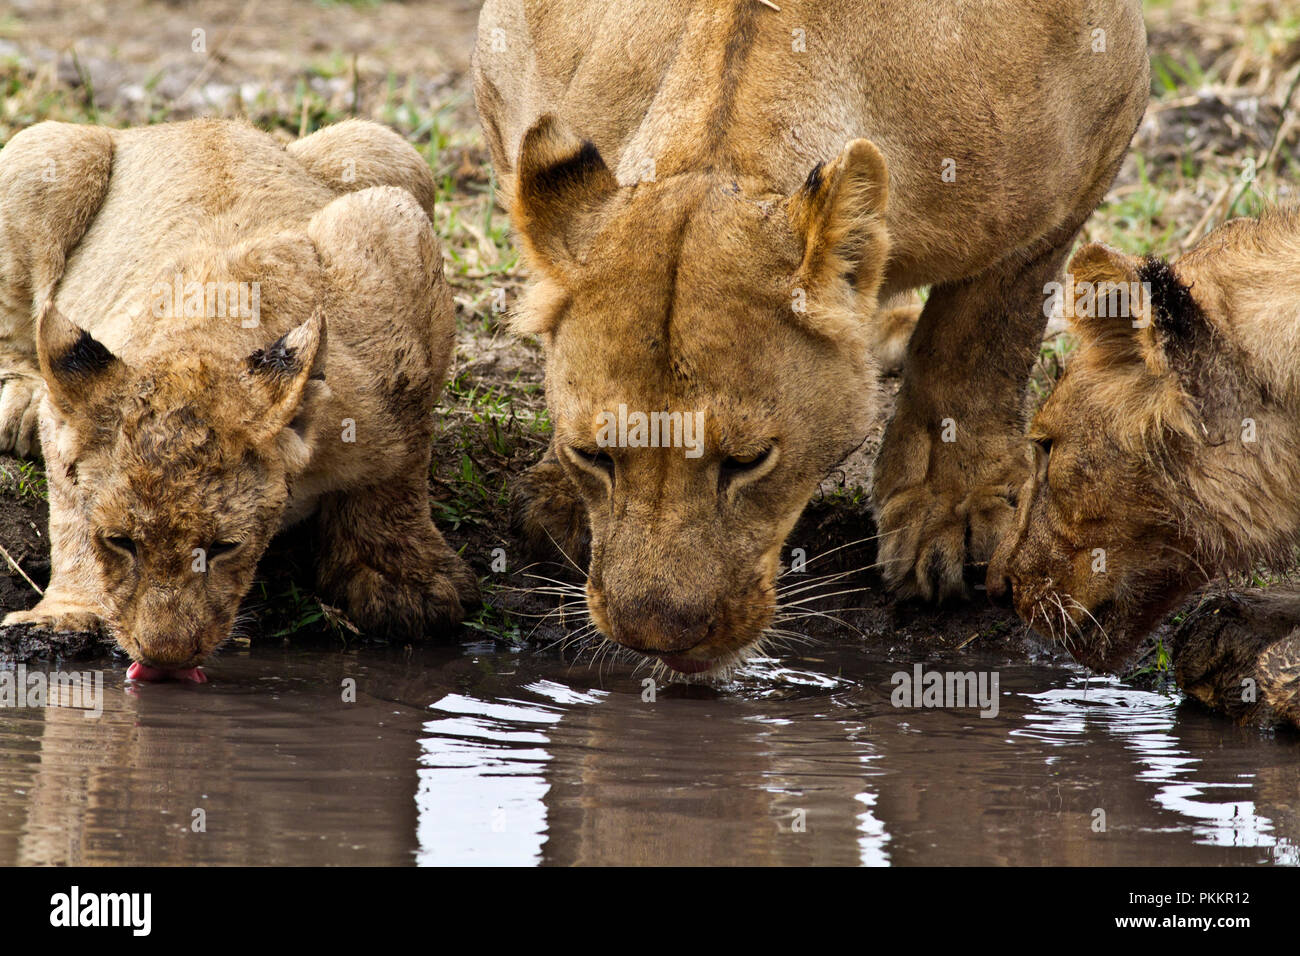 Lions of the Katuma Pride drink froma rain pool rather than the crocodile infested Katuma River nearby. Stock Photo